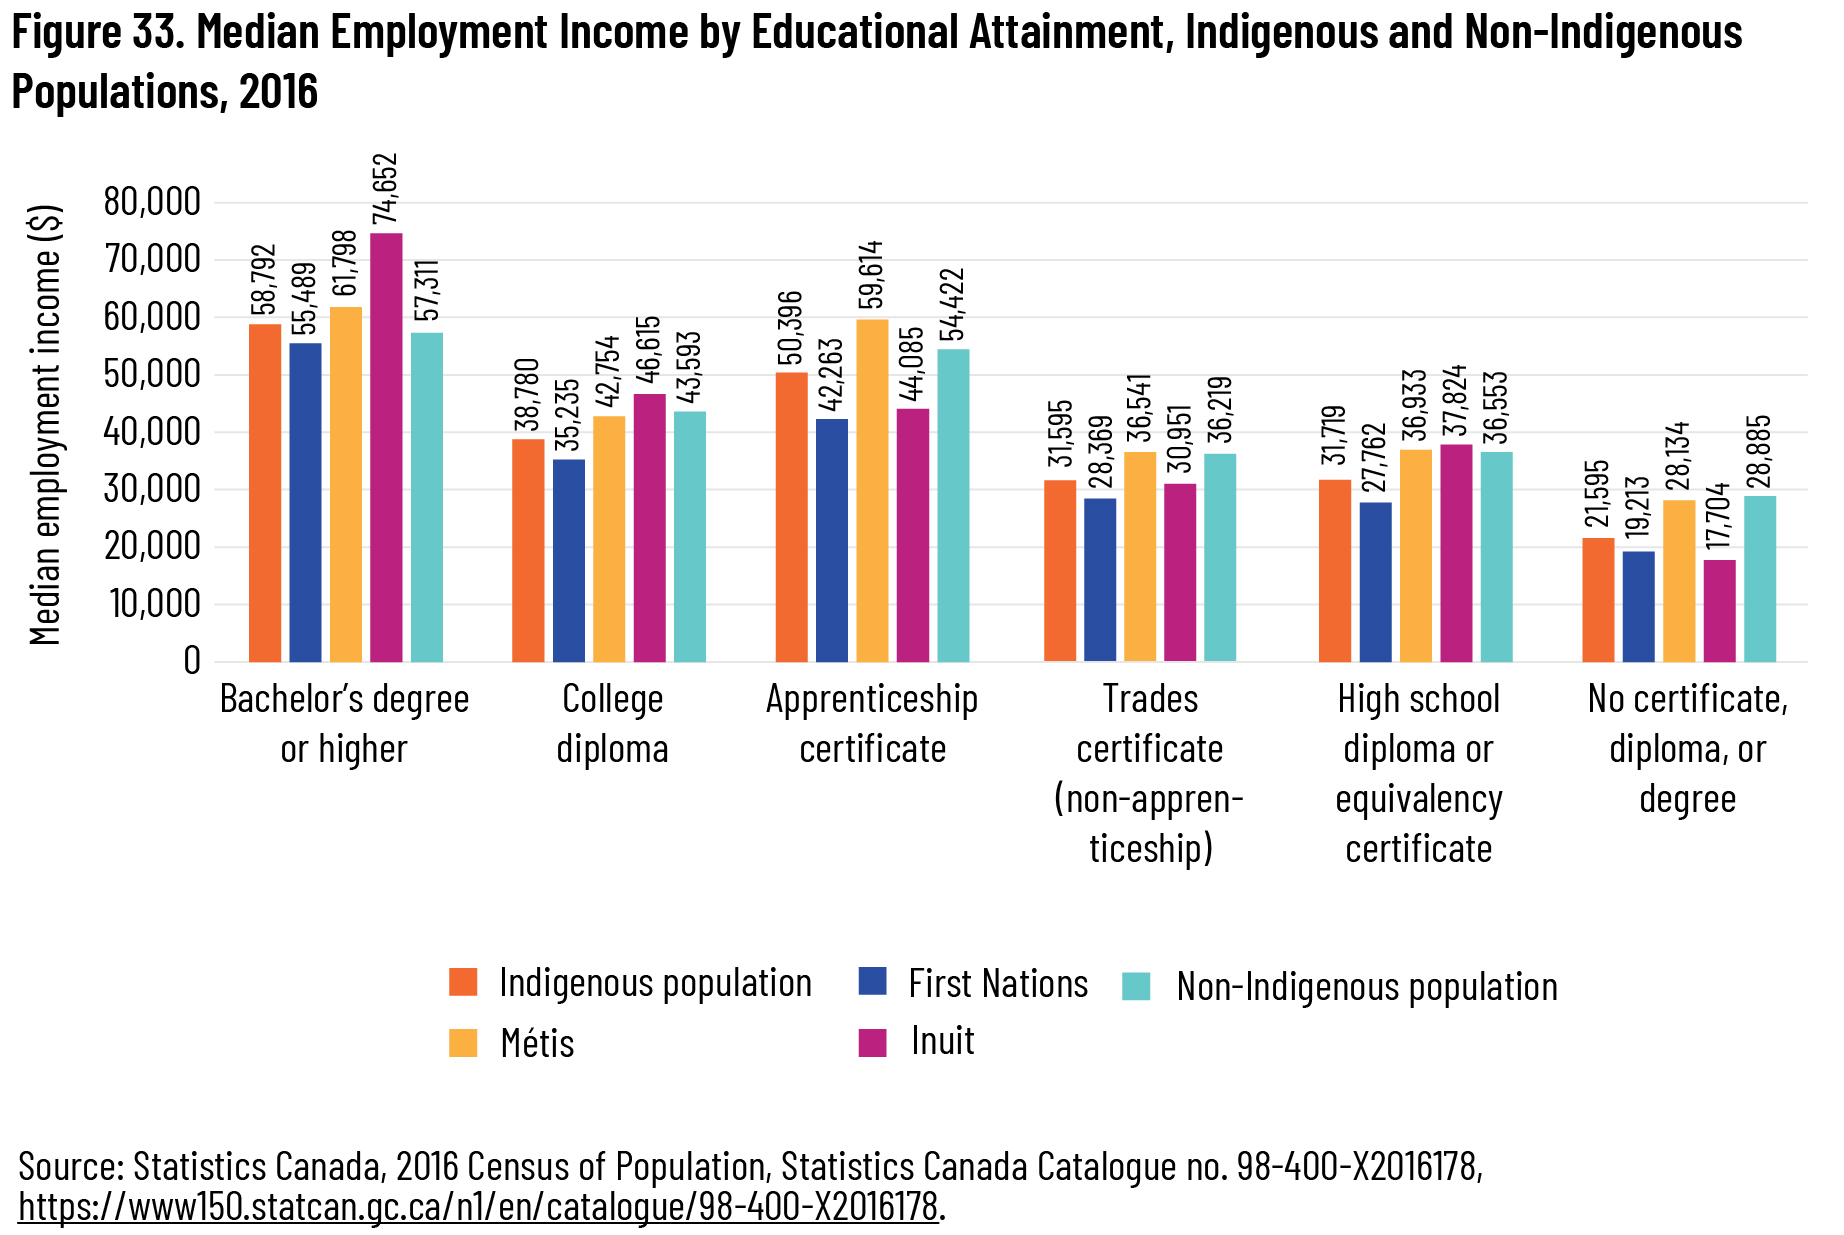 Figure 33. Median Employment Income by Educational Attainment, Indigenous and Non-Indigenous Populations, 2016